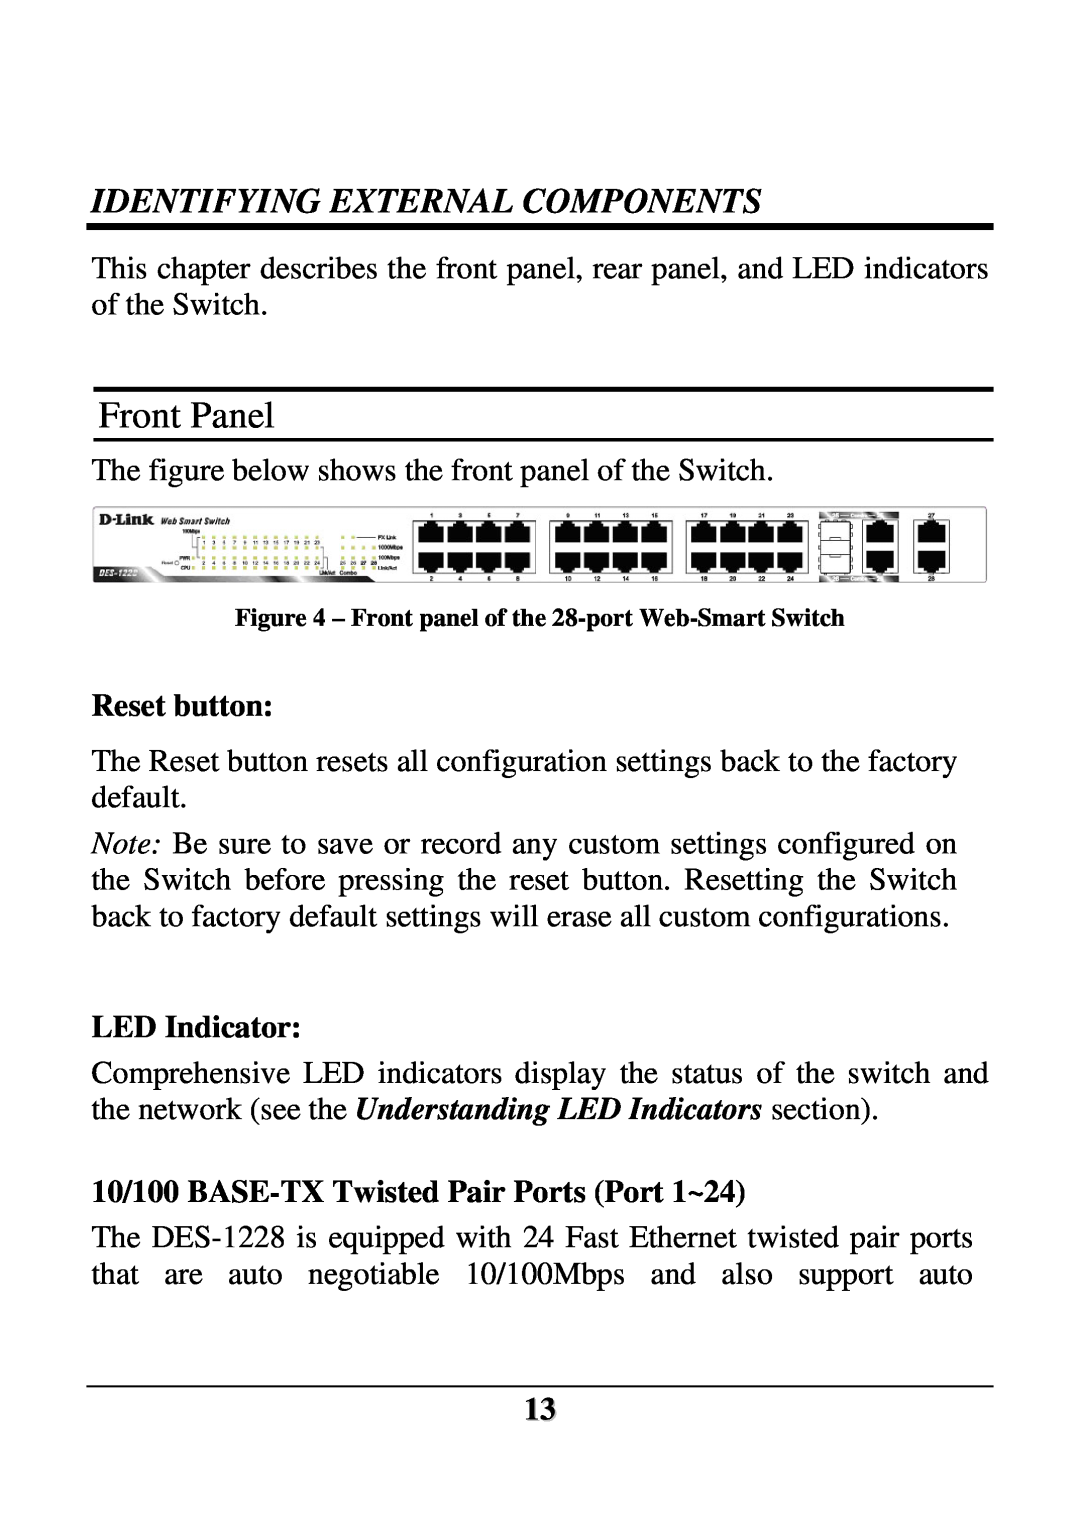 D-Link DES-1228 user manual Front Panel, Identifying External Components, Reset button, LED Indicator 